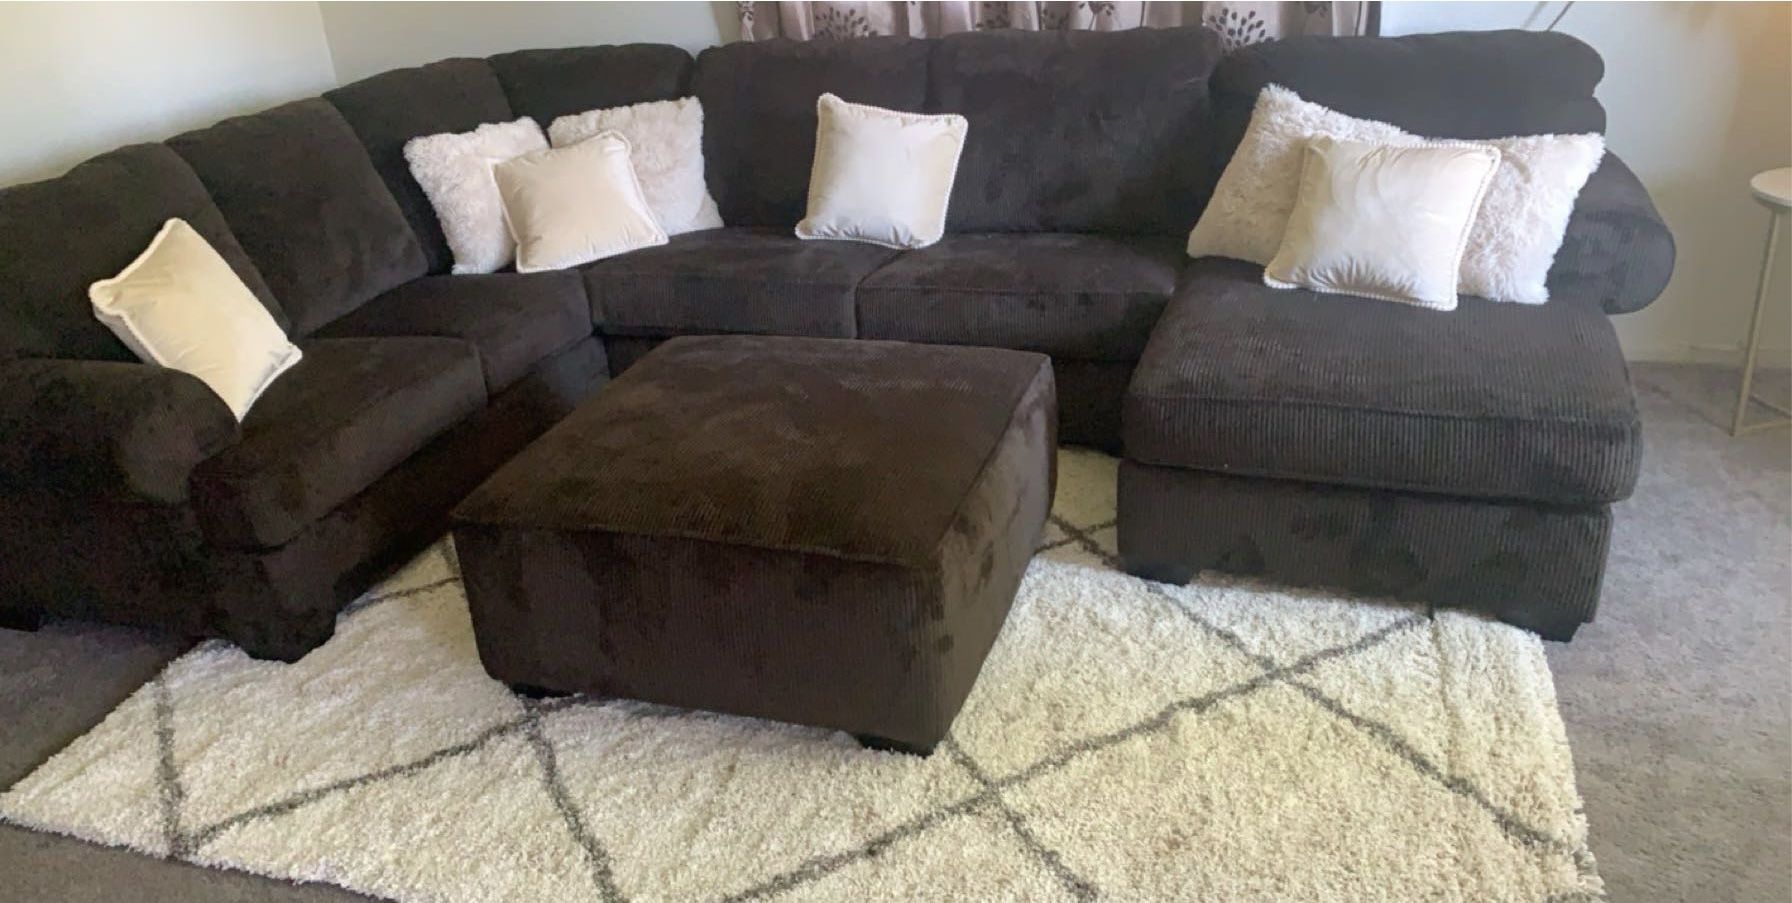 3 pc Sectional Couch